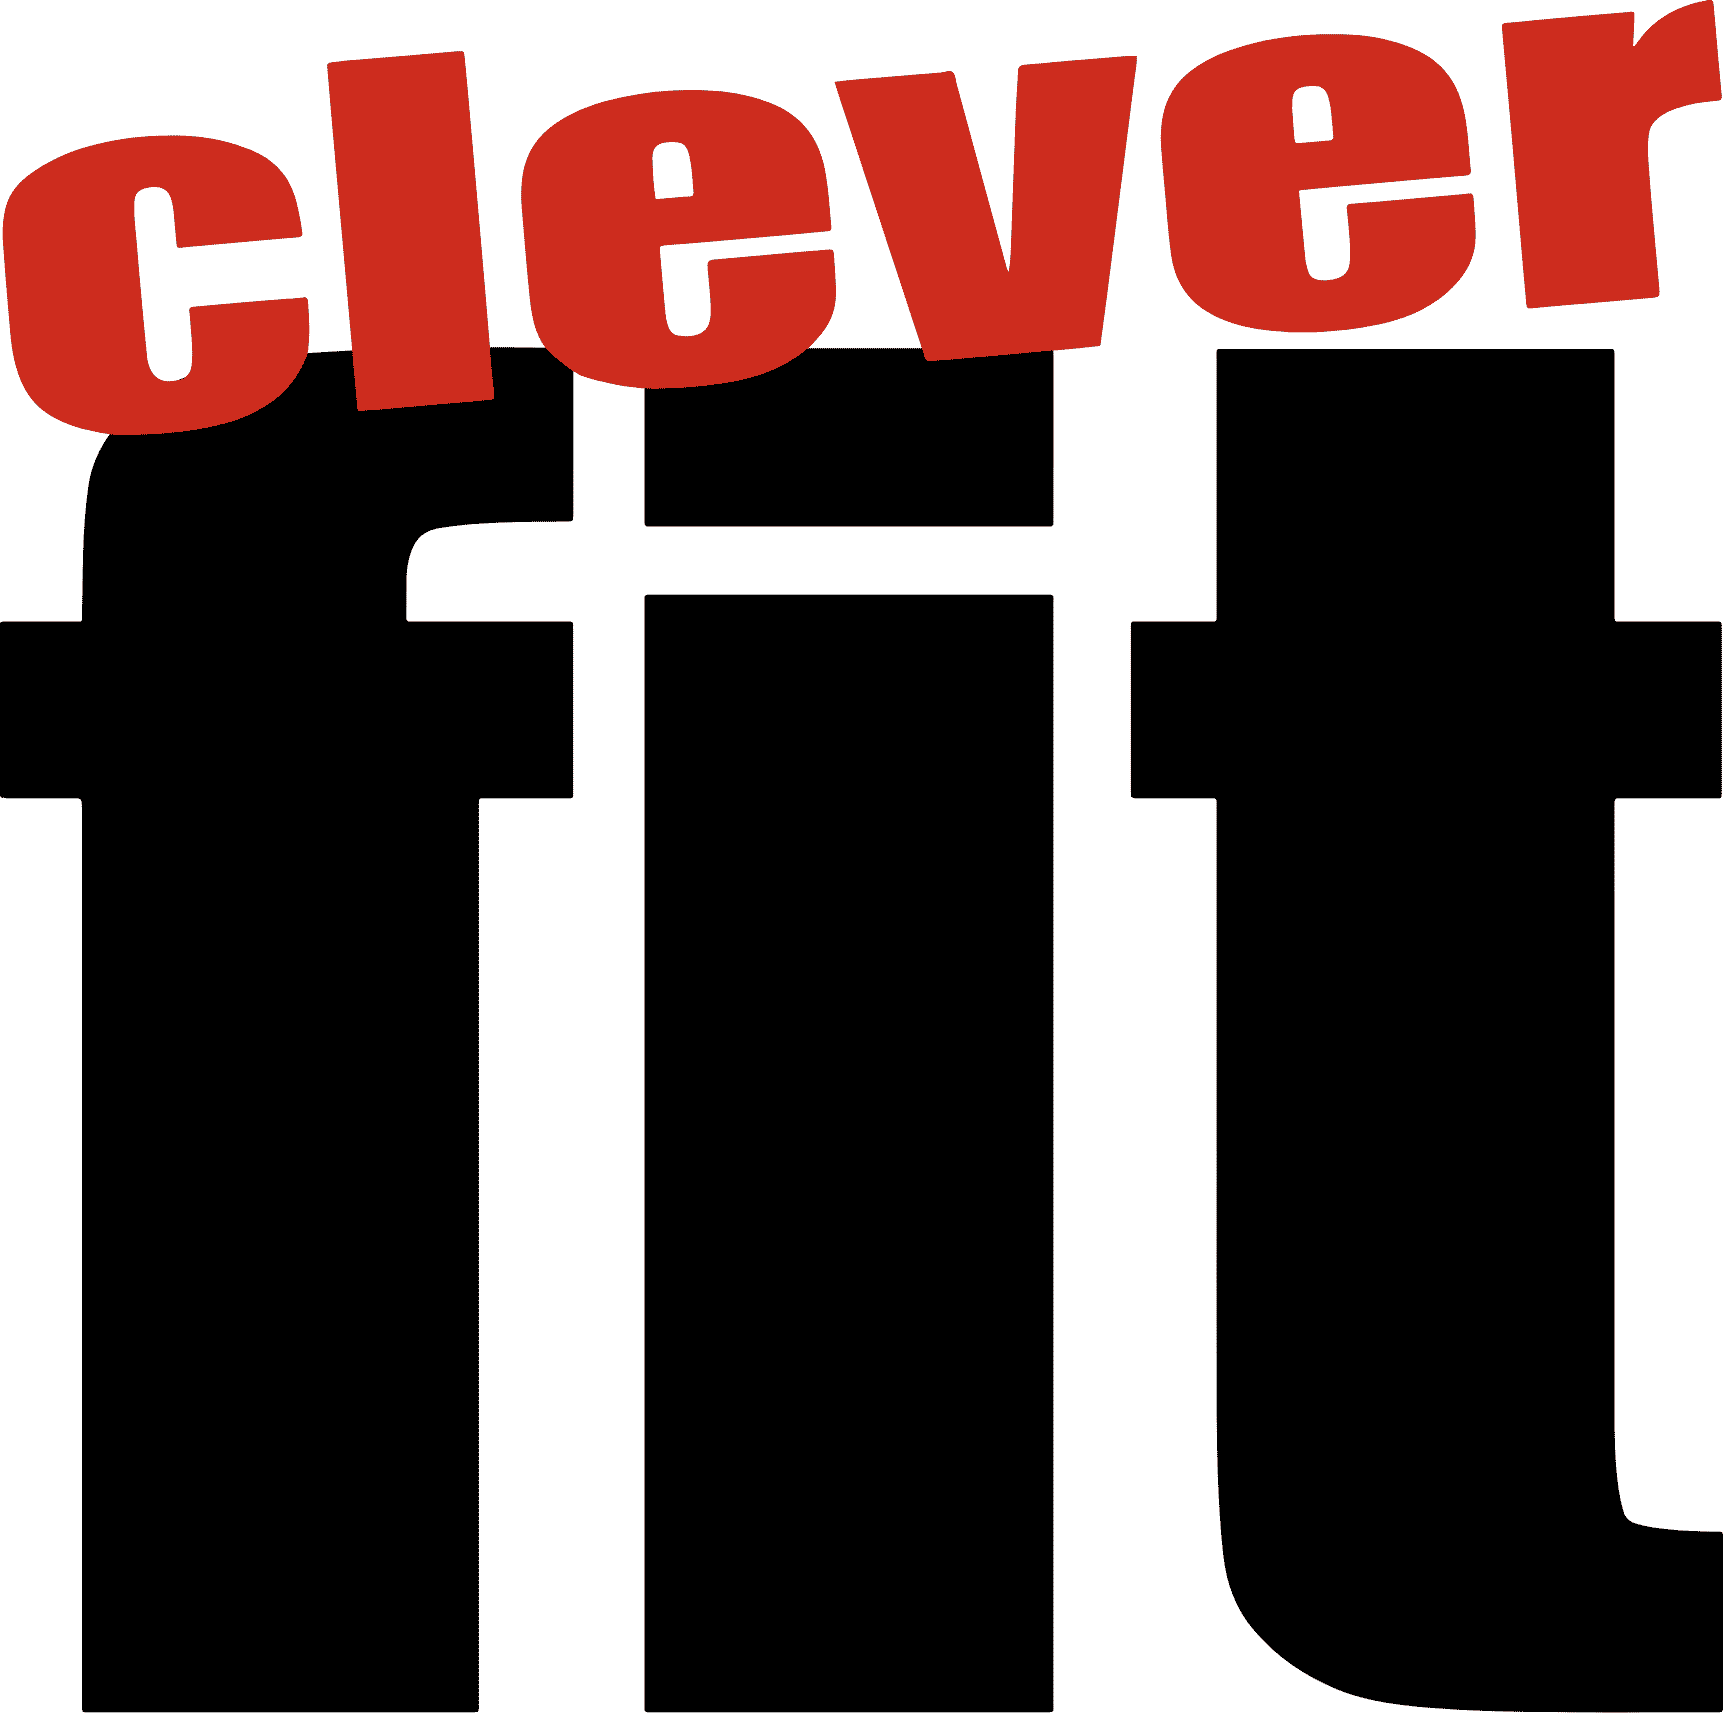 clever-fit-logo